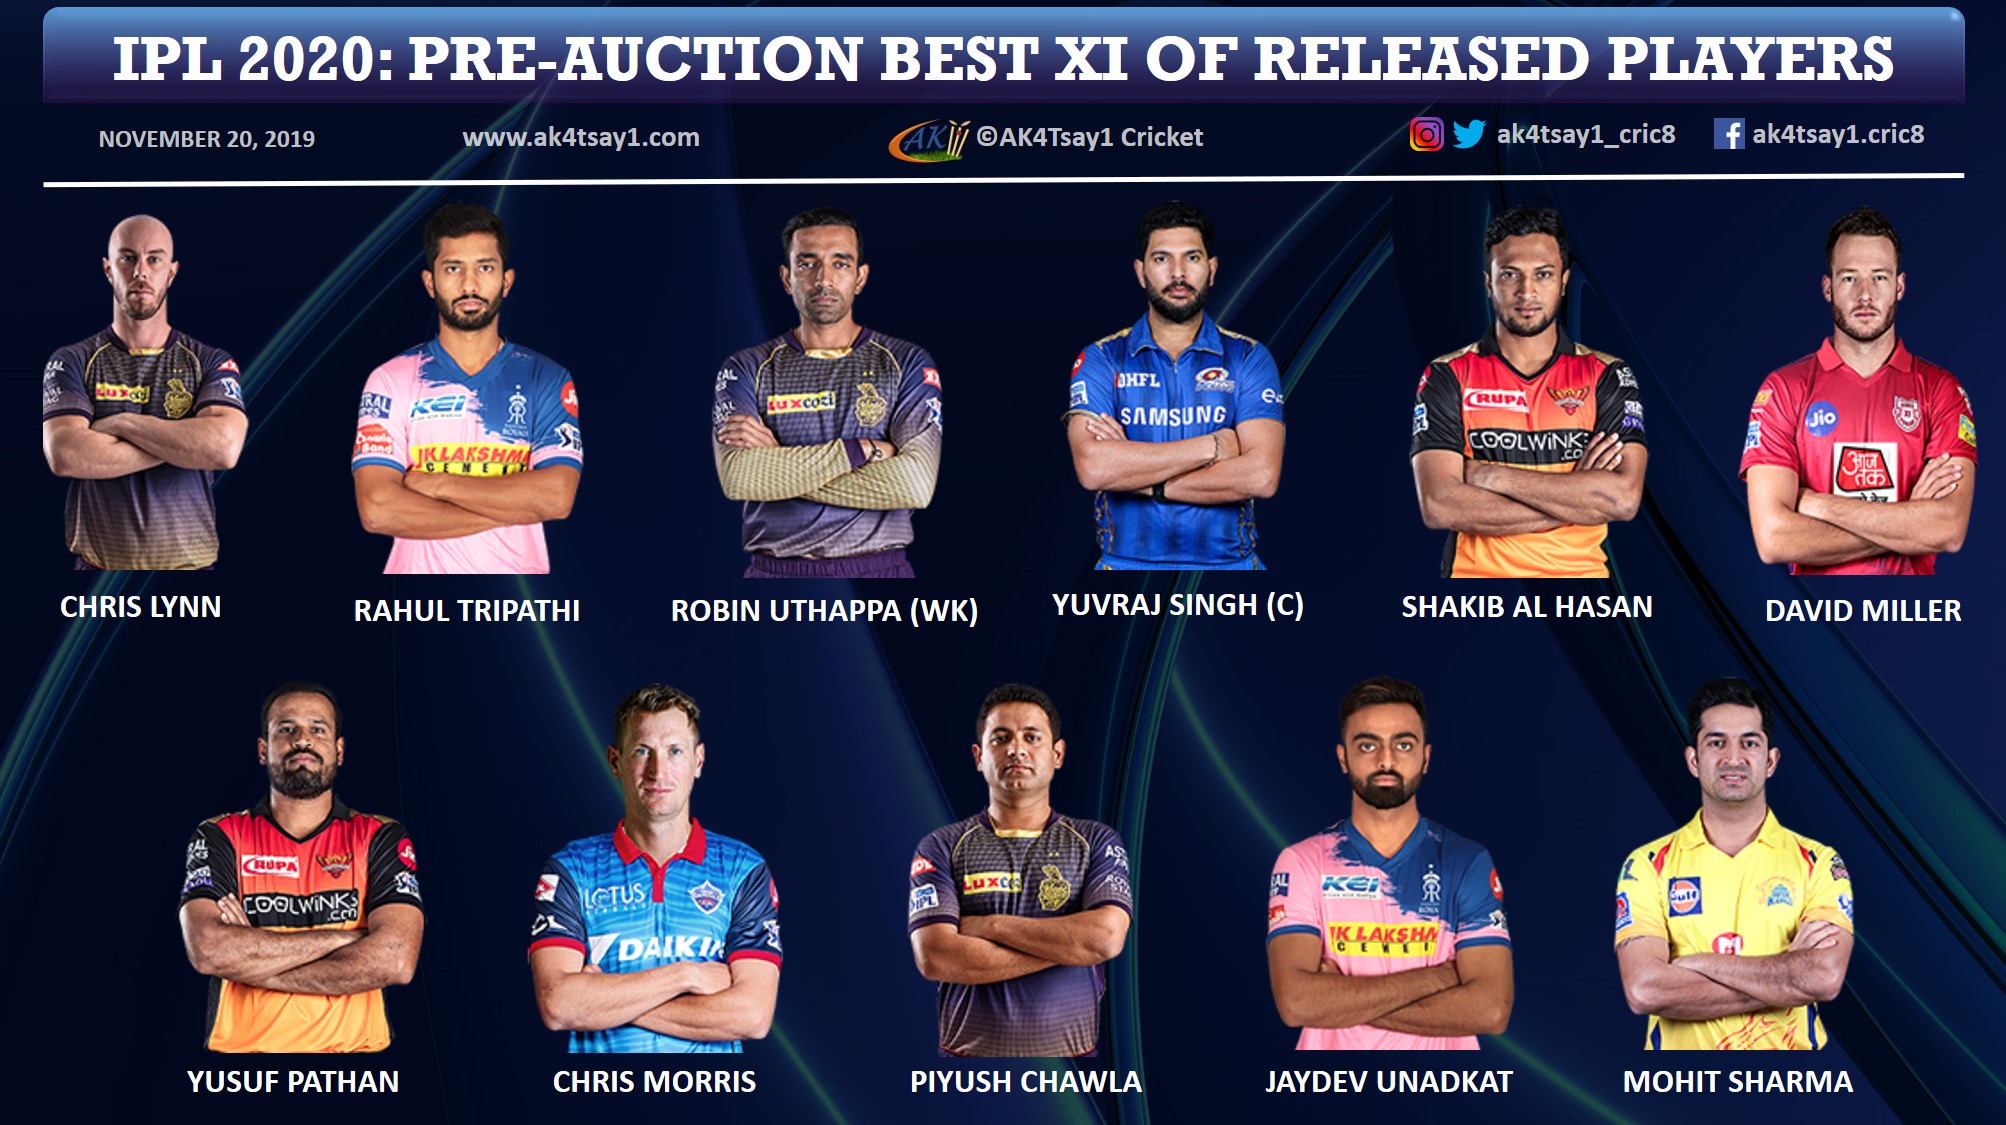 IPL 2020: The Pre-Auction Best 11 of Released Players